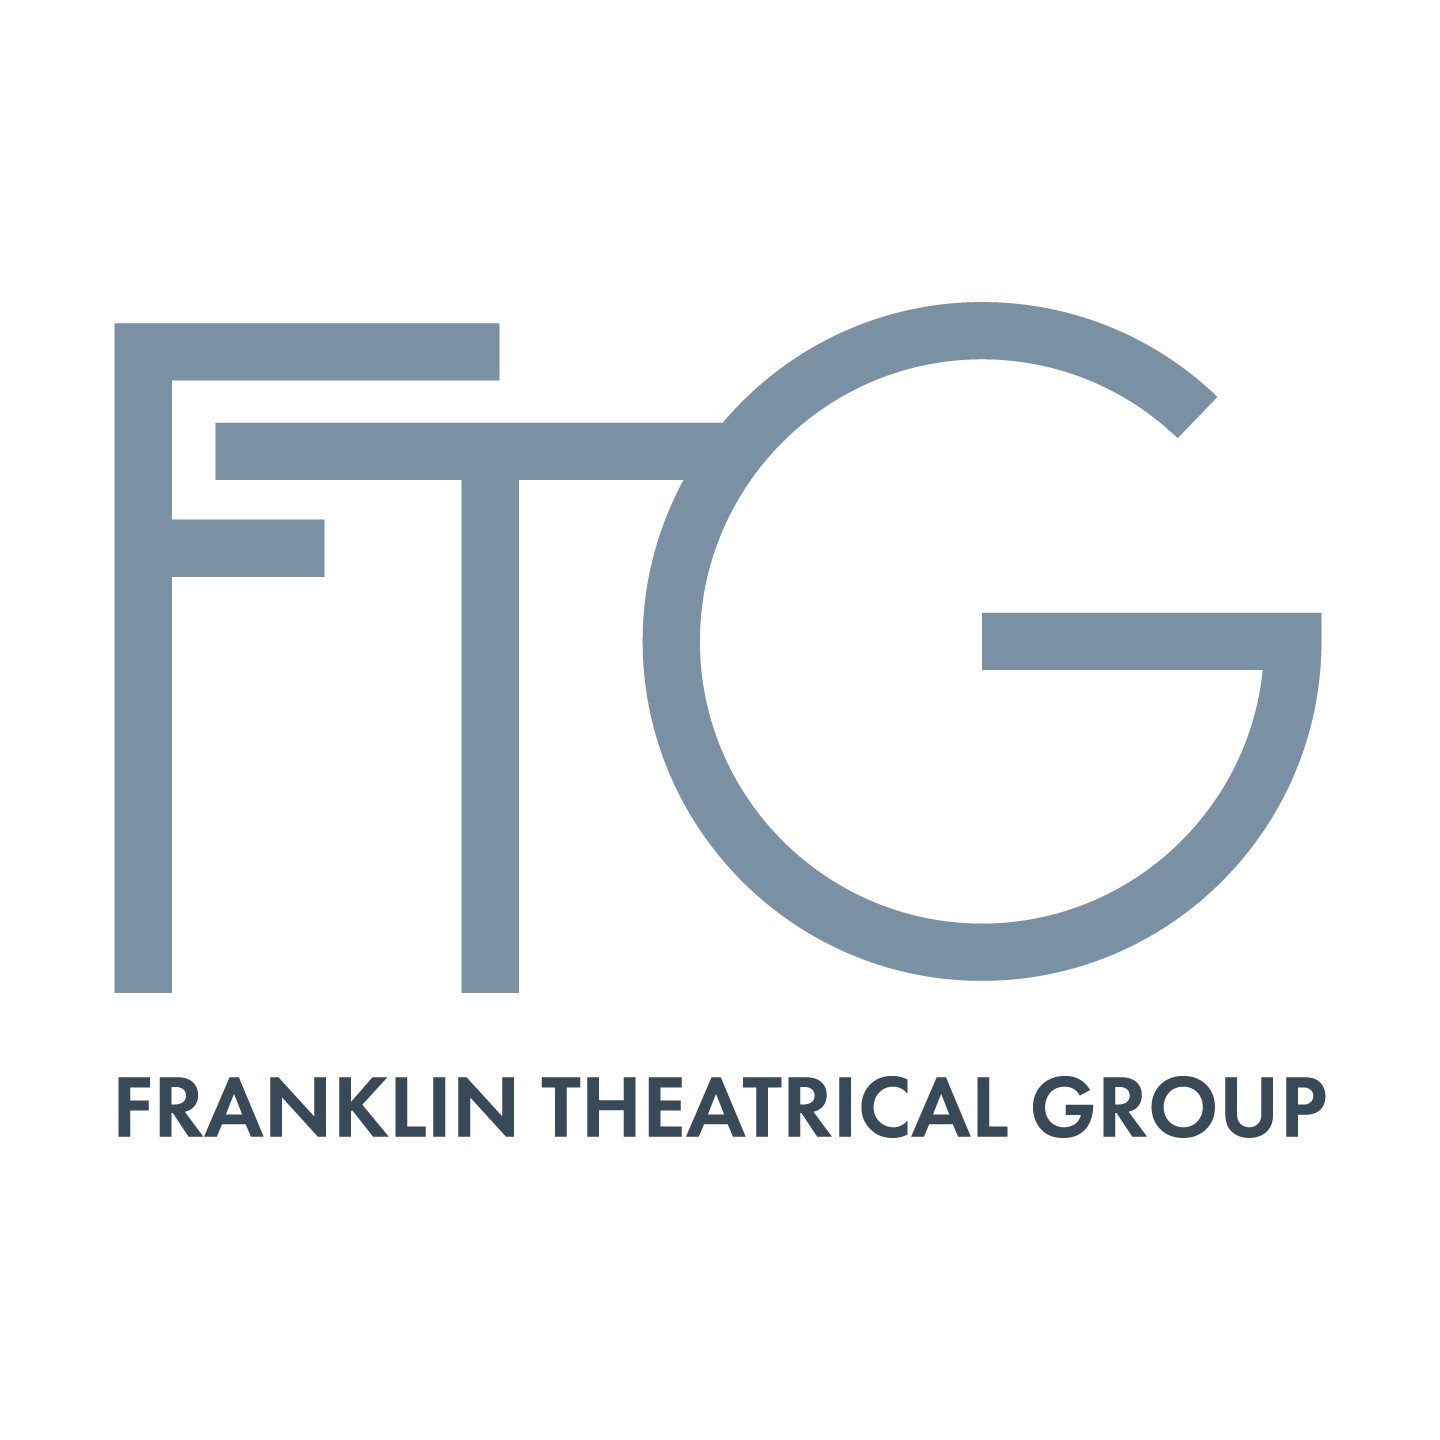 Franklin Theatrical Group